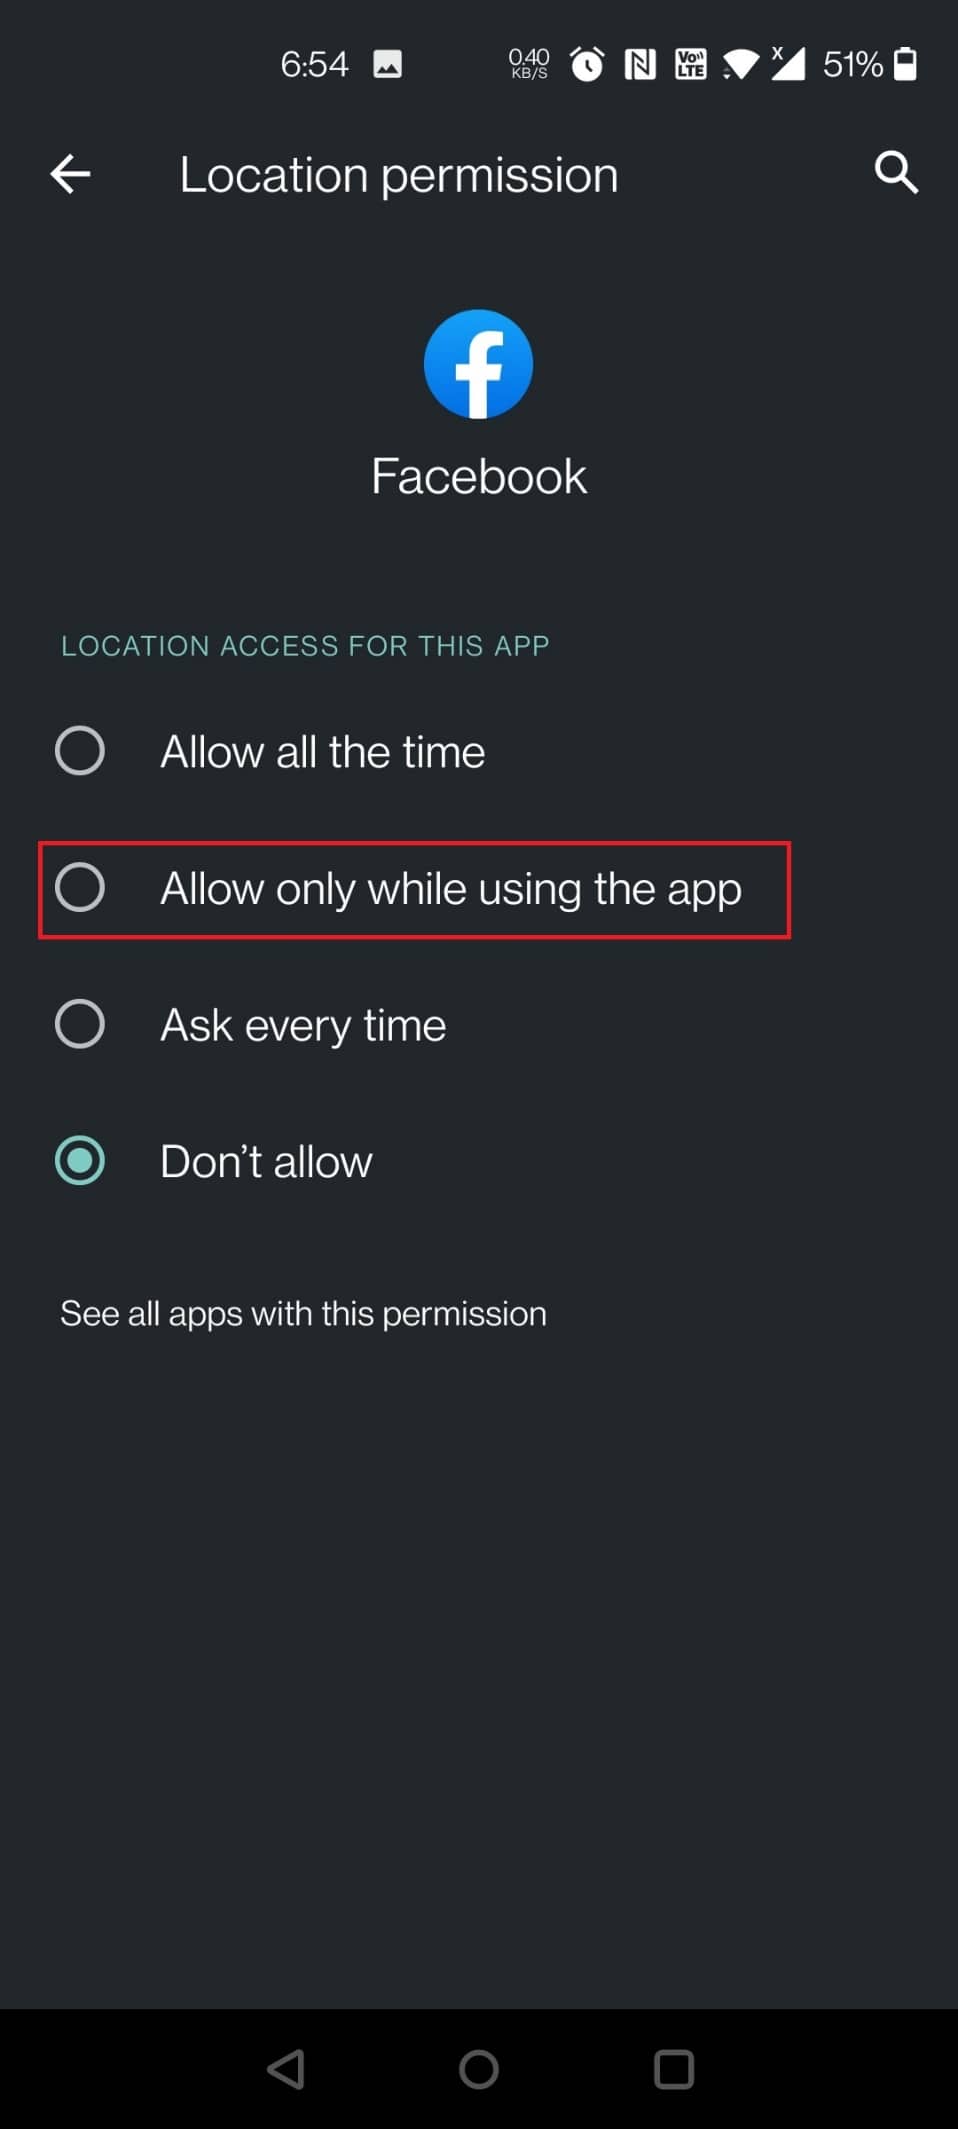 tap on Allow only while using the app